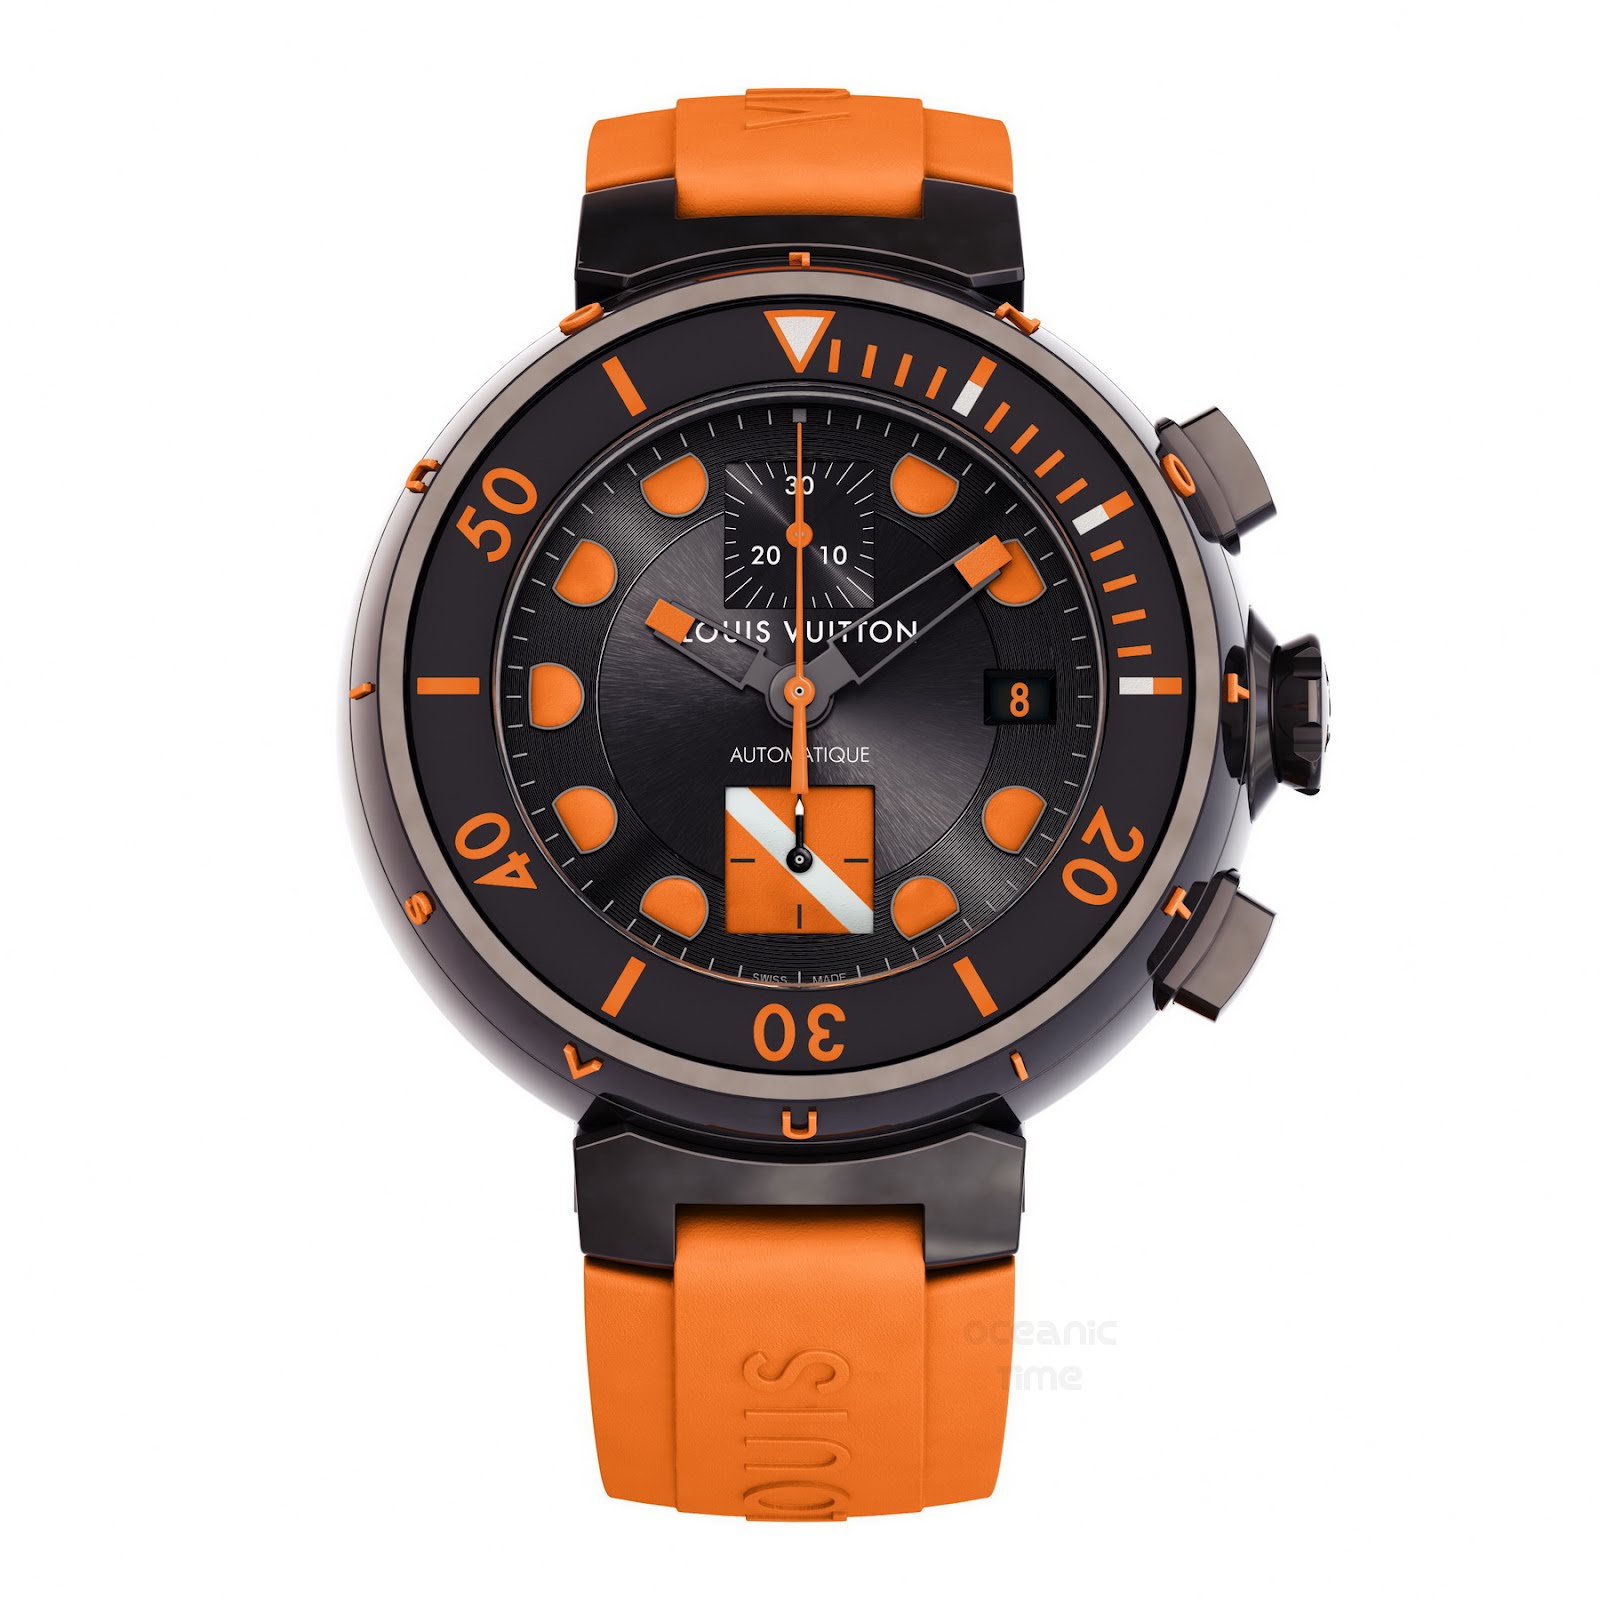 OceanicTime: LOUIS VUITTON Tambour Diver Chronograph for ONLY WATCH 2011